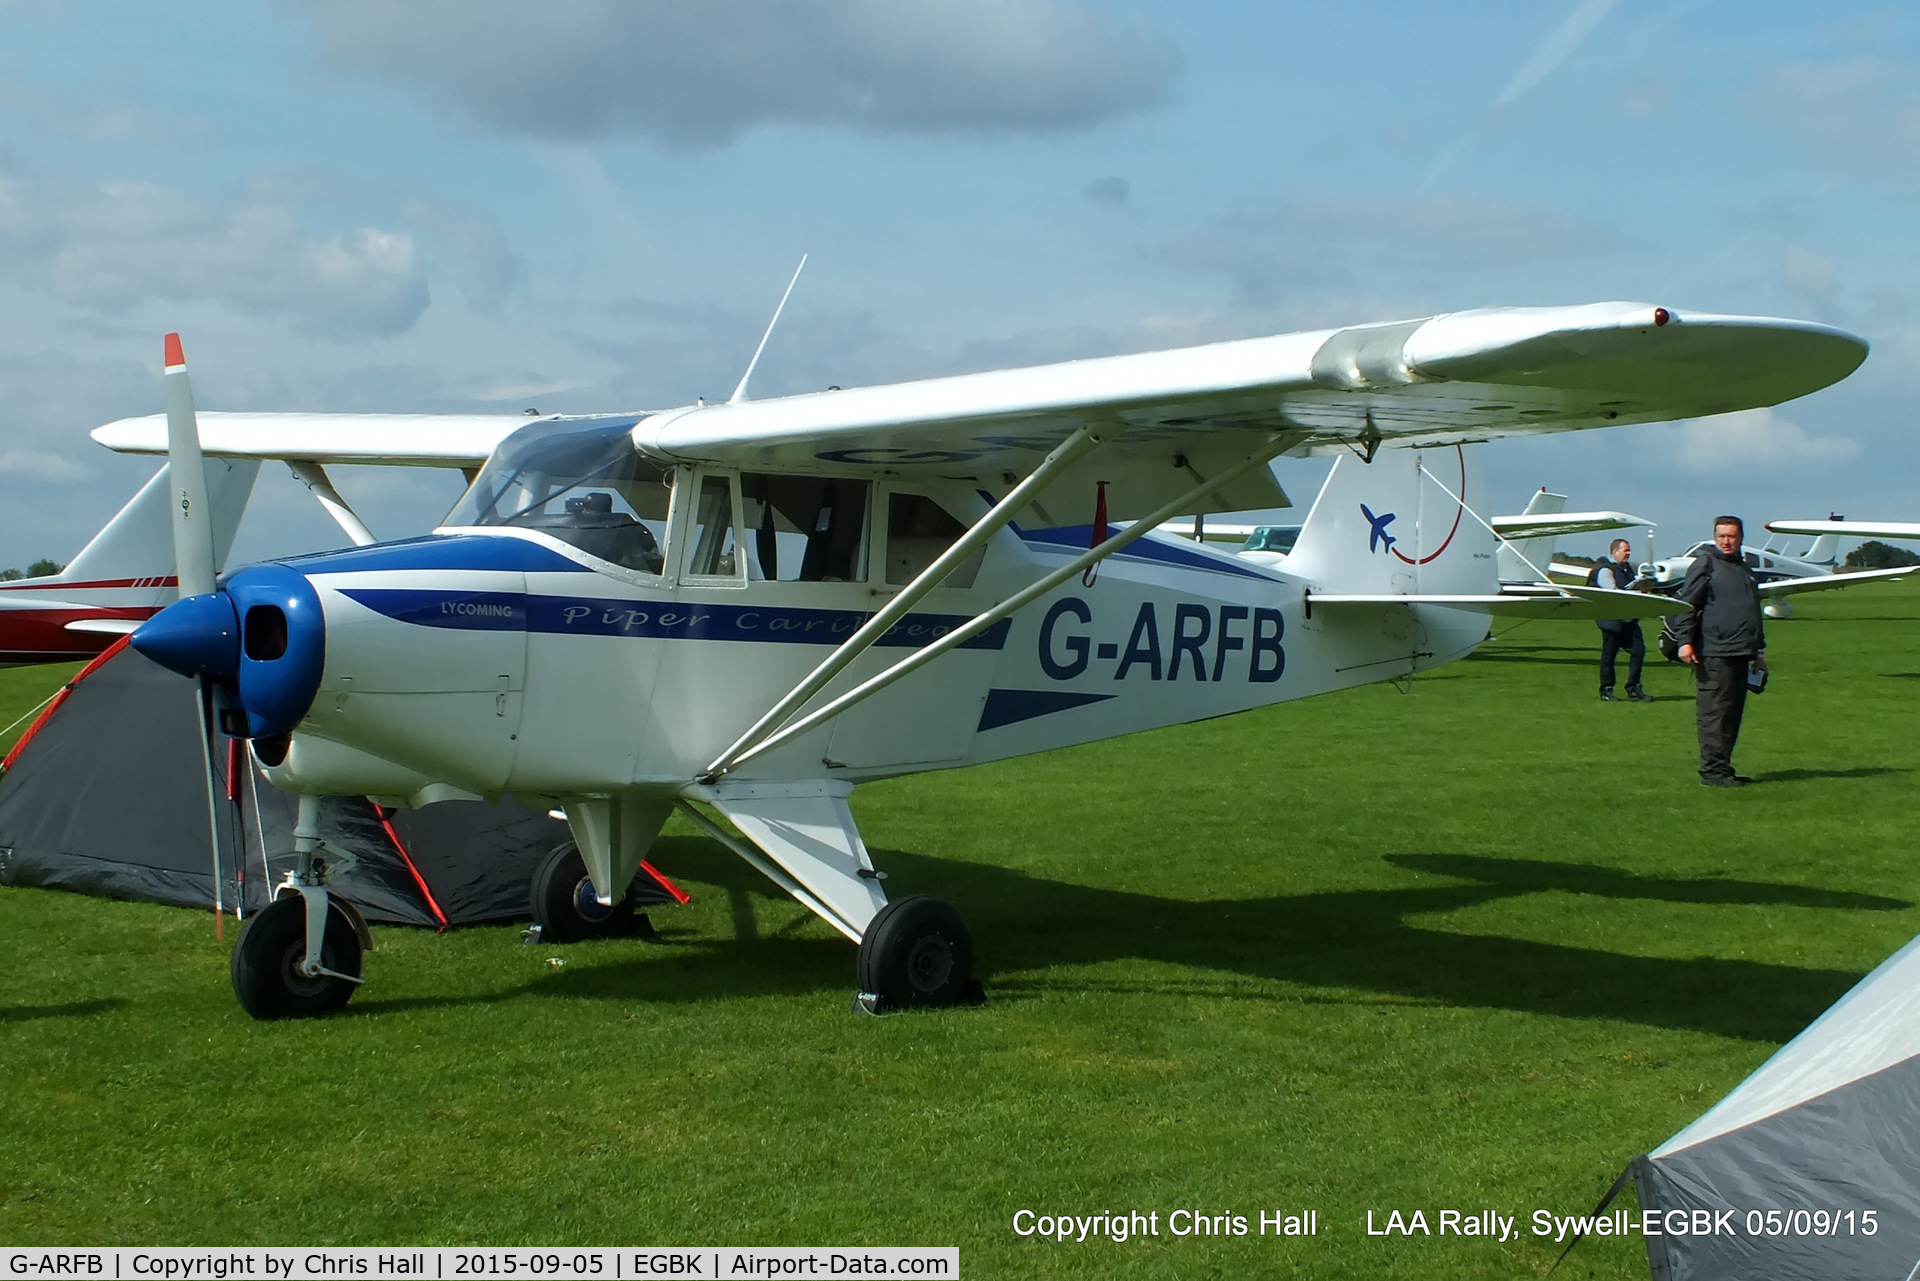 G-ARFB, 1960 Piper PA-22-150 Caribbean C/N 22-7518, at the LAA Rally 2015, Sywell